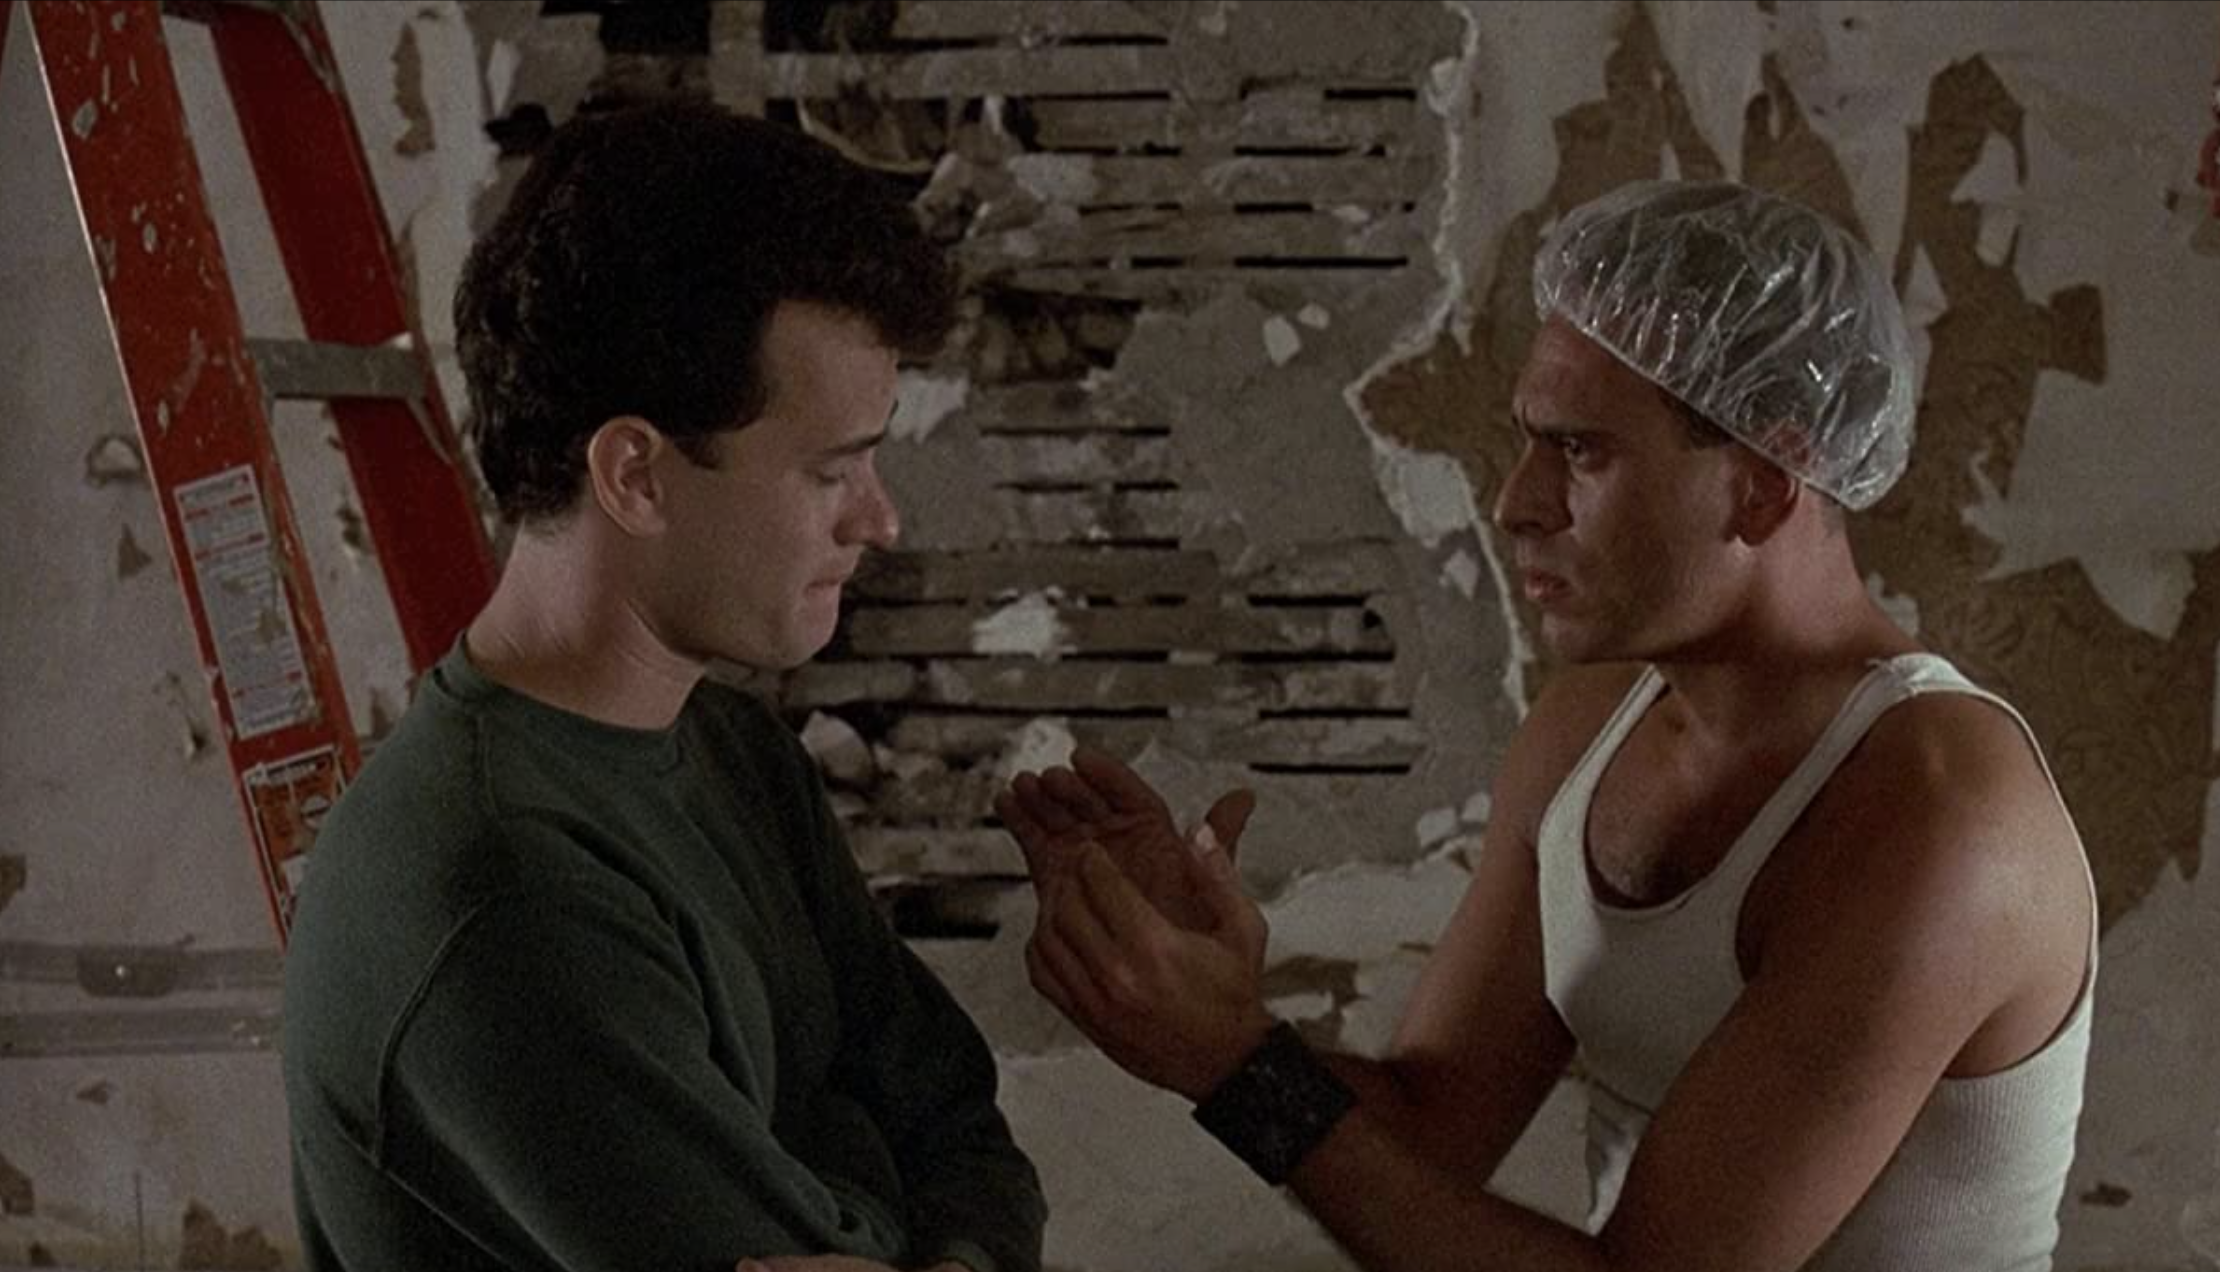 Tom Hanks in the money pit winces at his breaking home